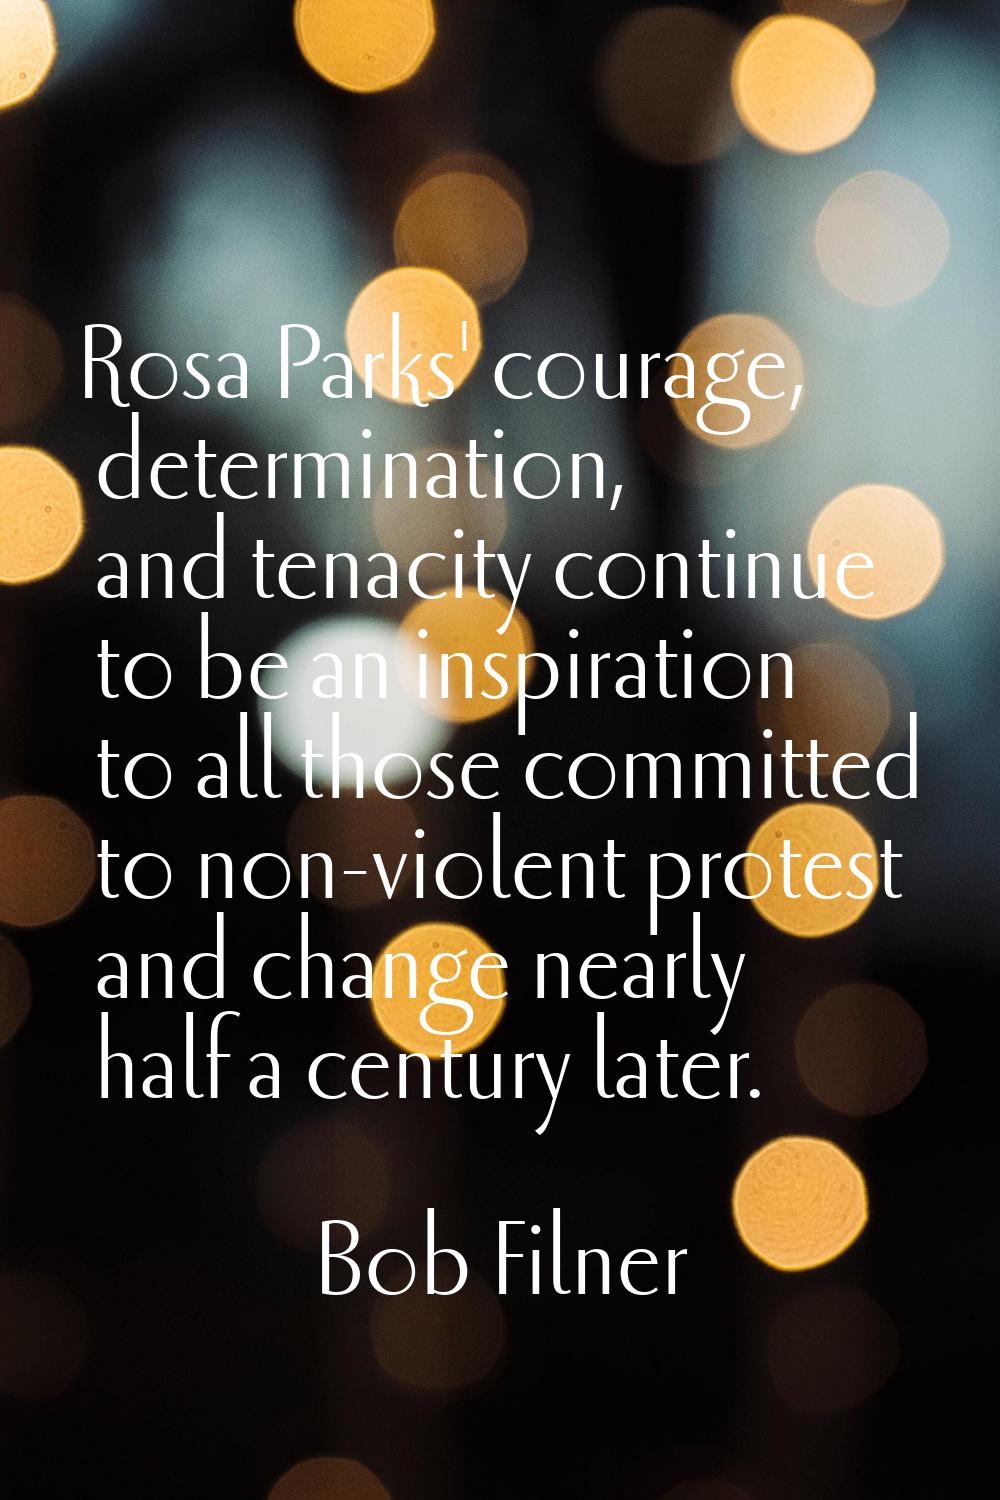 Rosa Parks' courage, determination, and tenacity continue to be an inspiration to all those committ